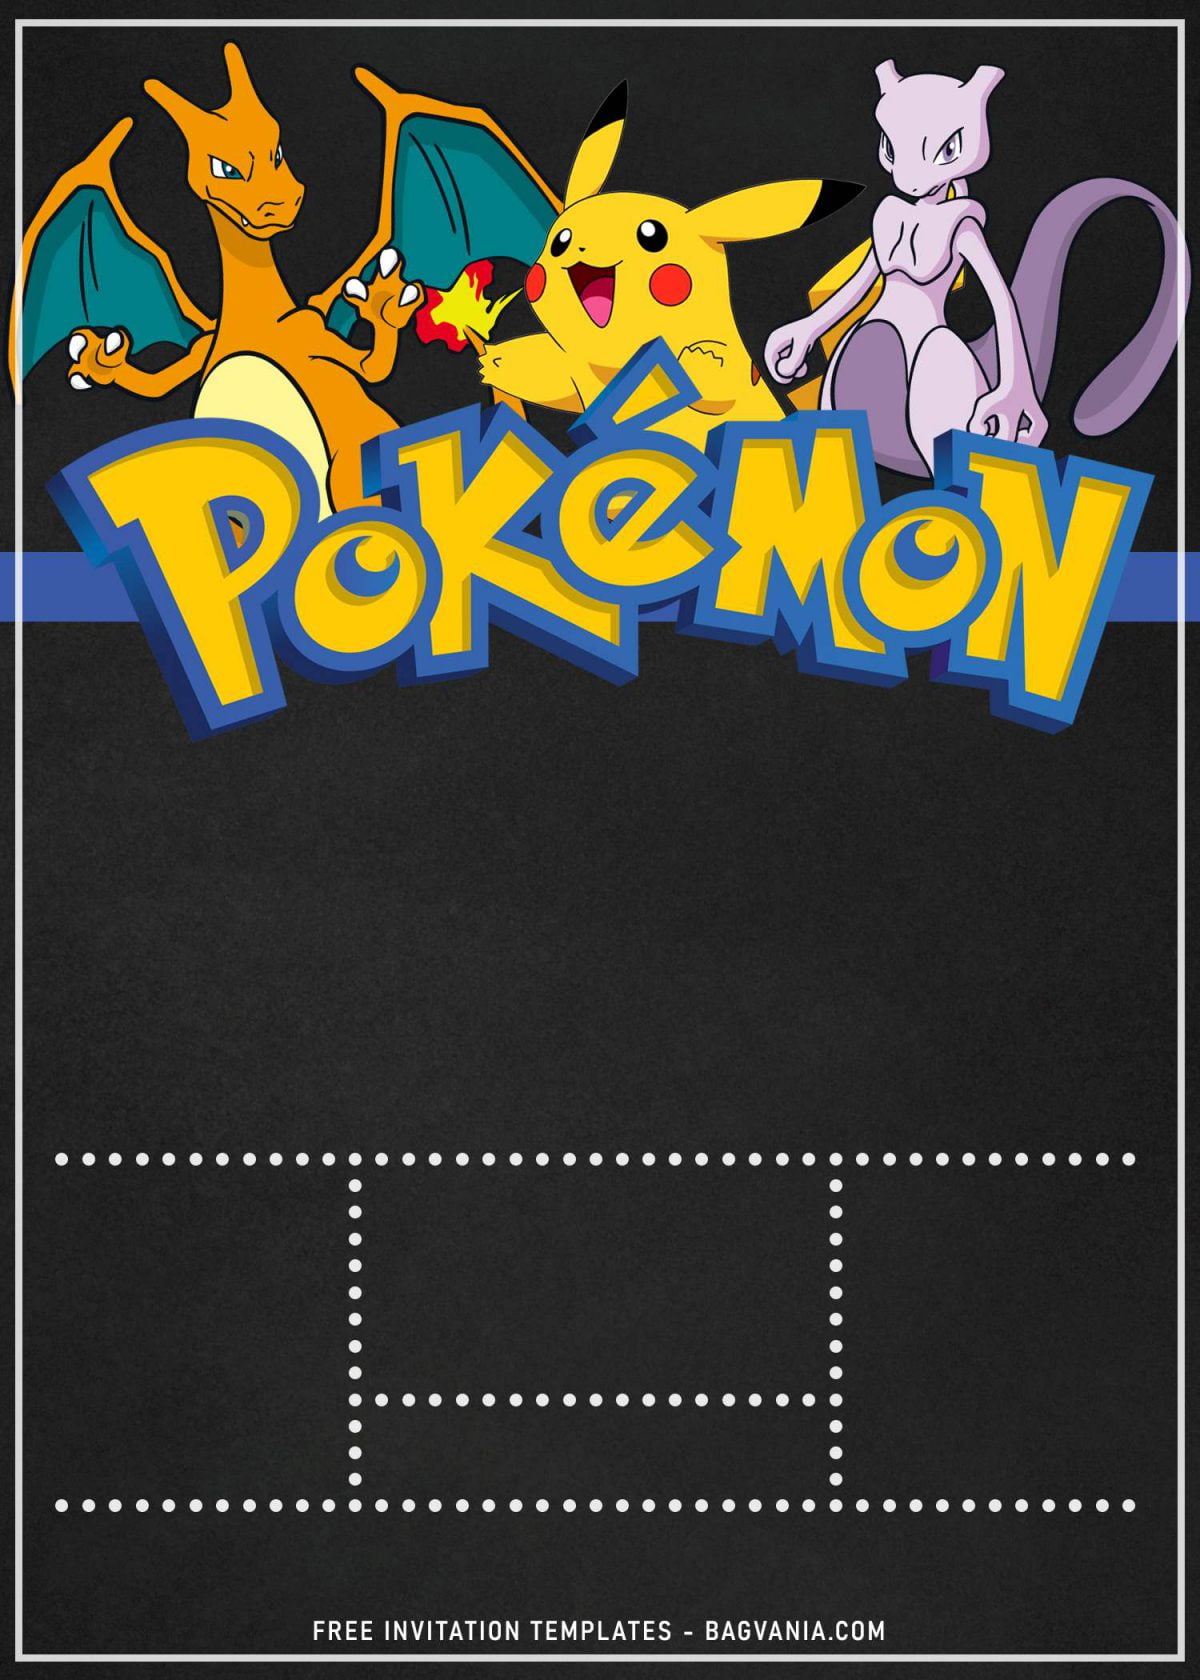 11+ Awesome Pokemon Chalkboard Invitation Templates For Boys Birthday Party and has Pikachu and Mewtwo